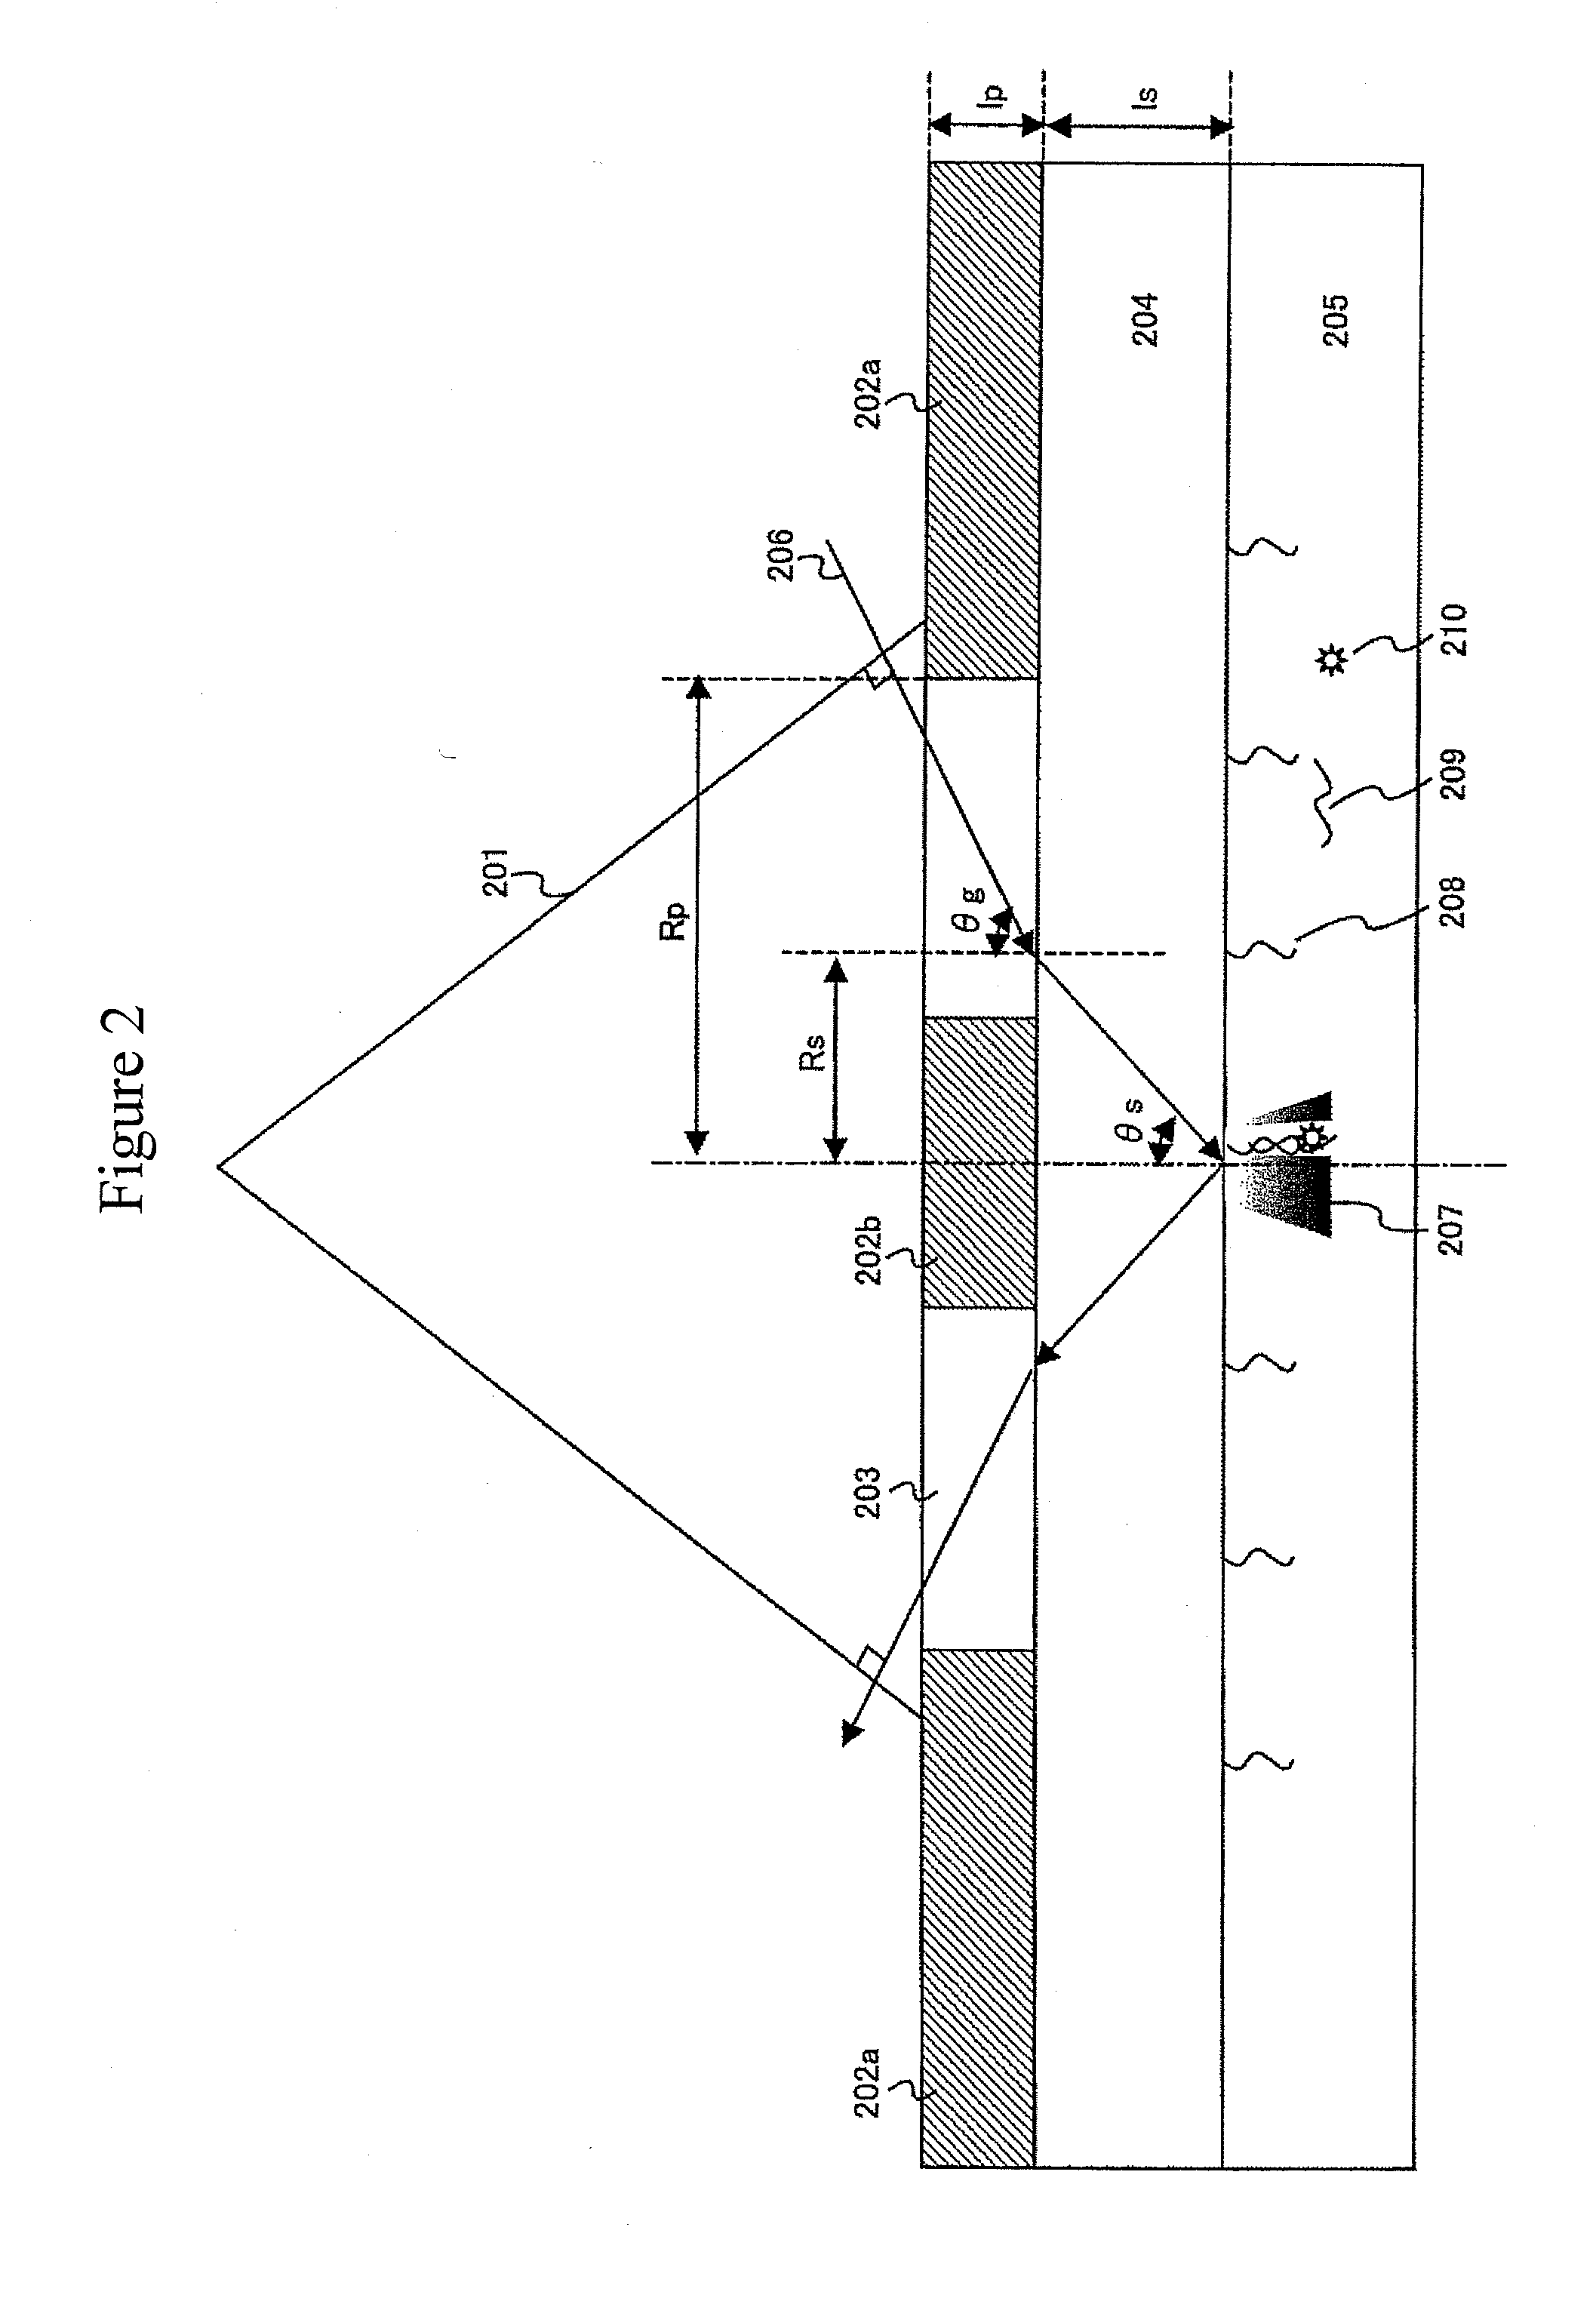 Total internal reflection microscope apparatus and method for analyzing fluorescent sample